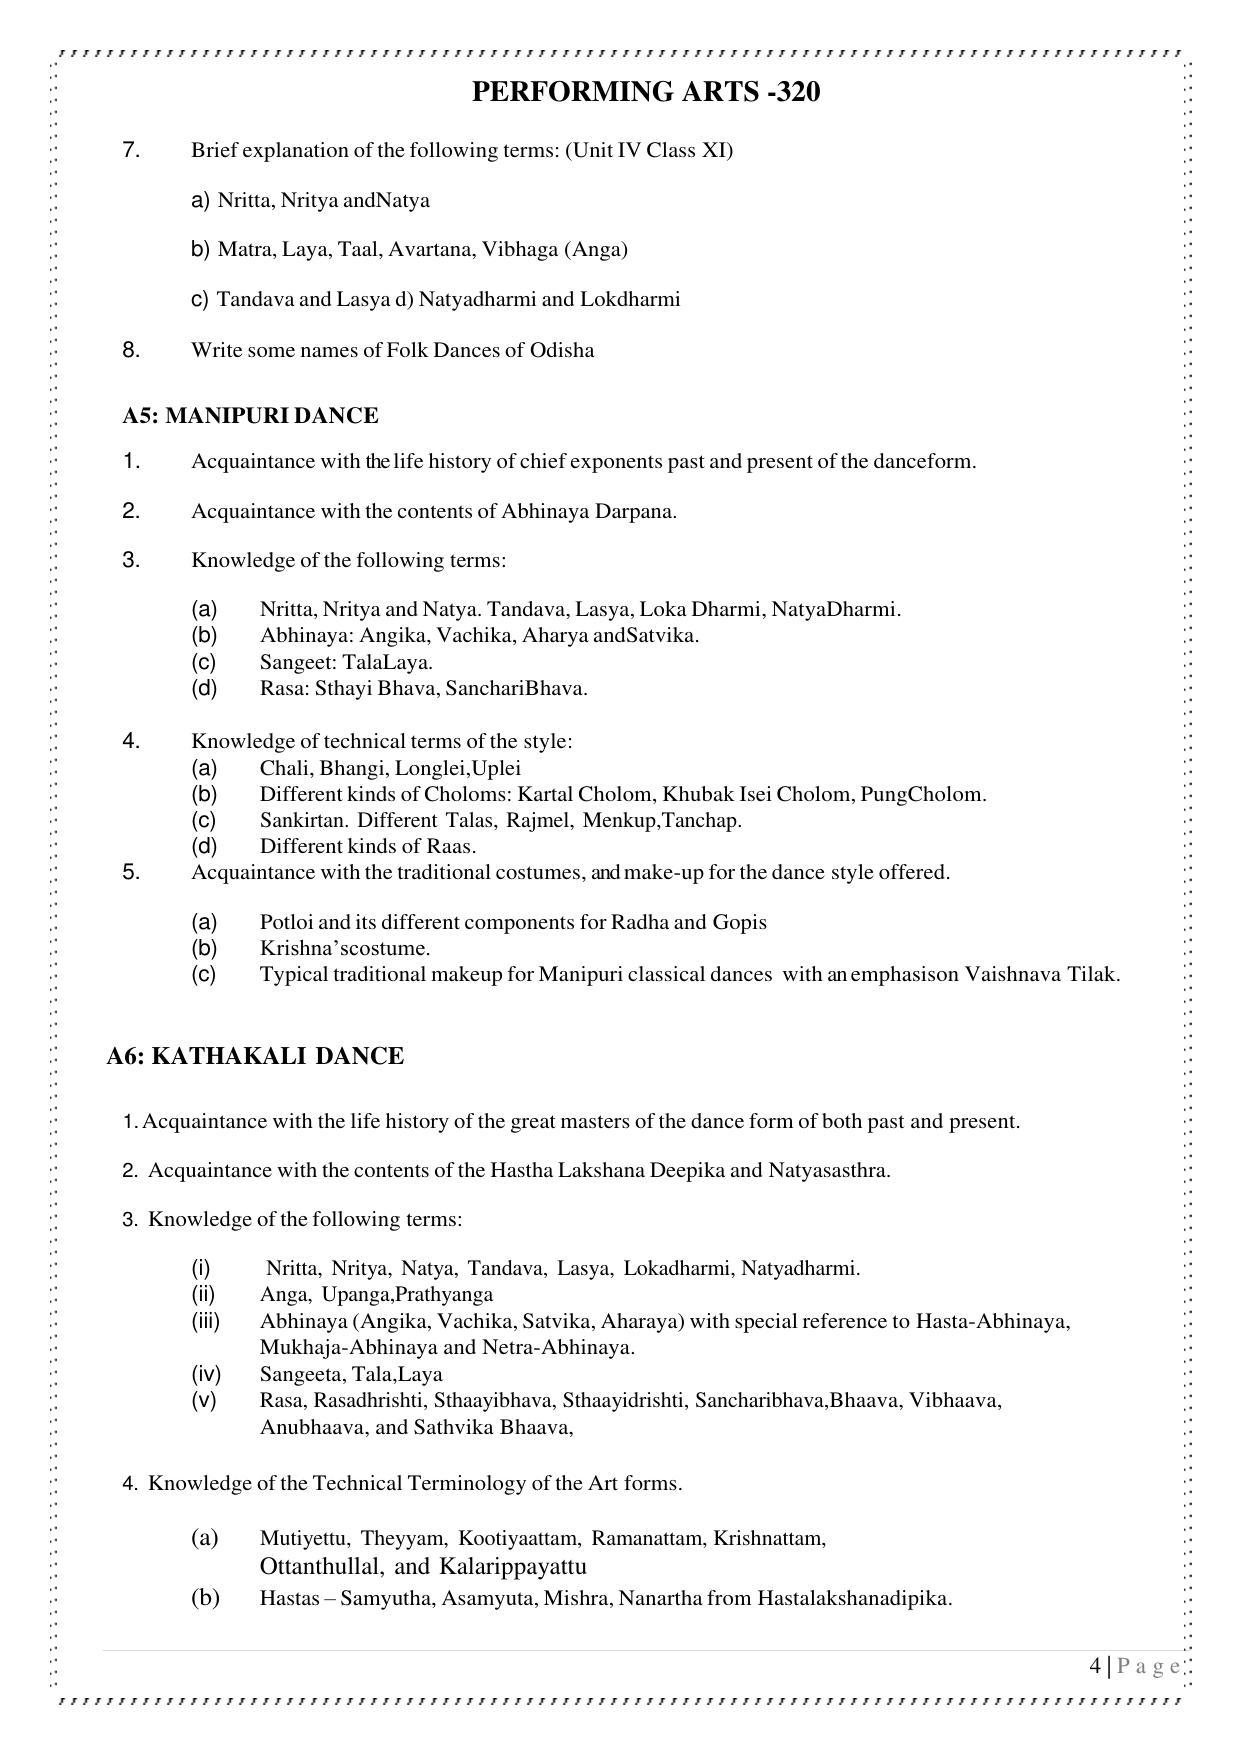 CUET Syllabus for Performing Arts (English) - Page 4